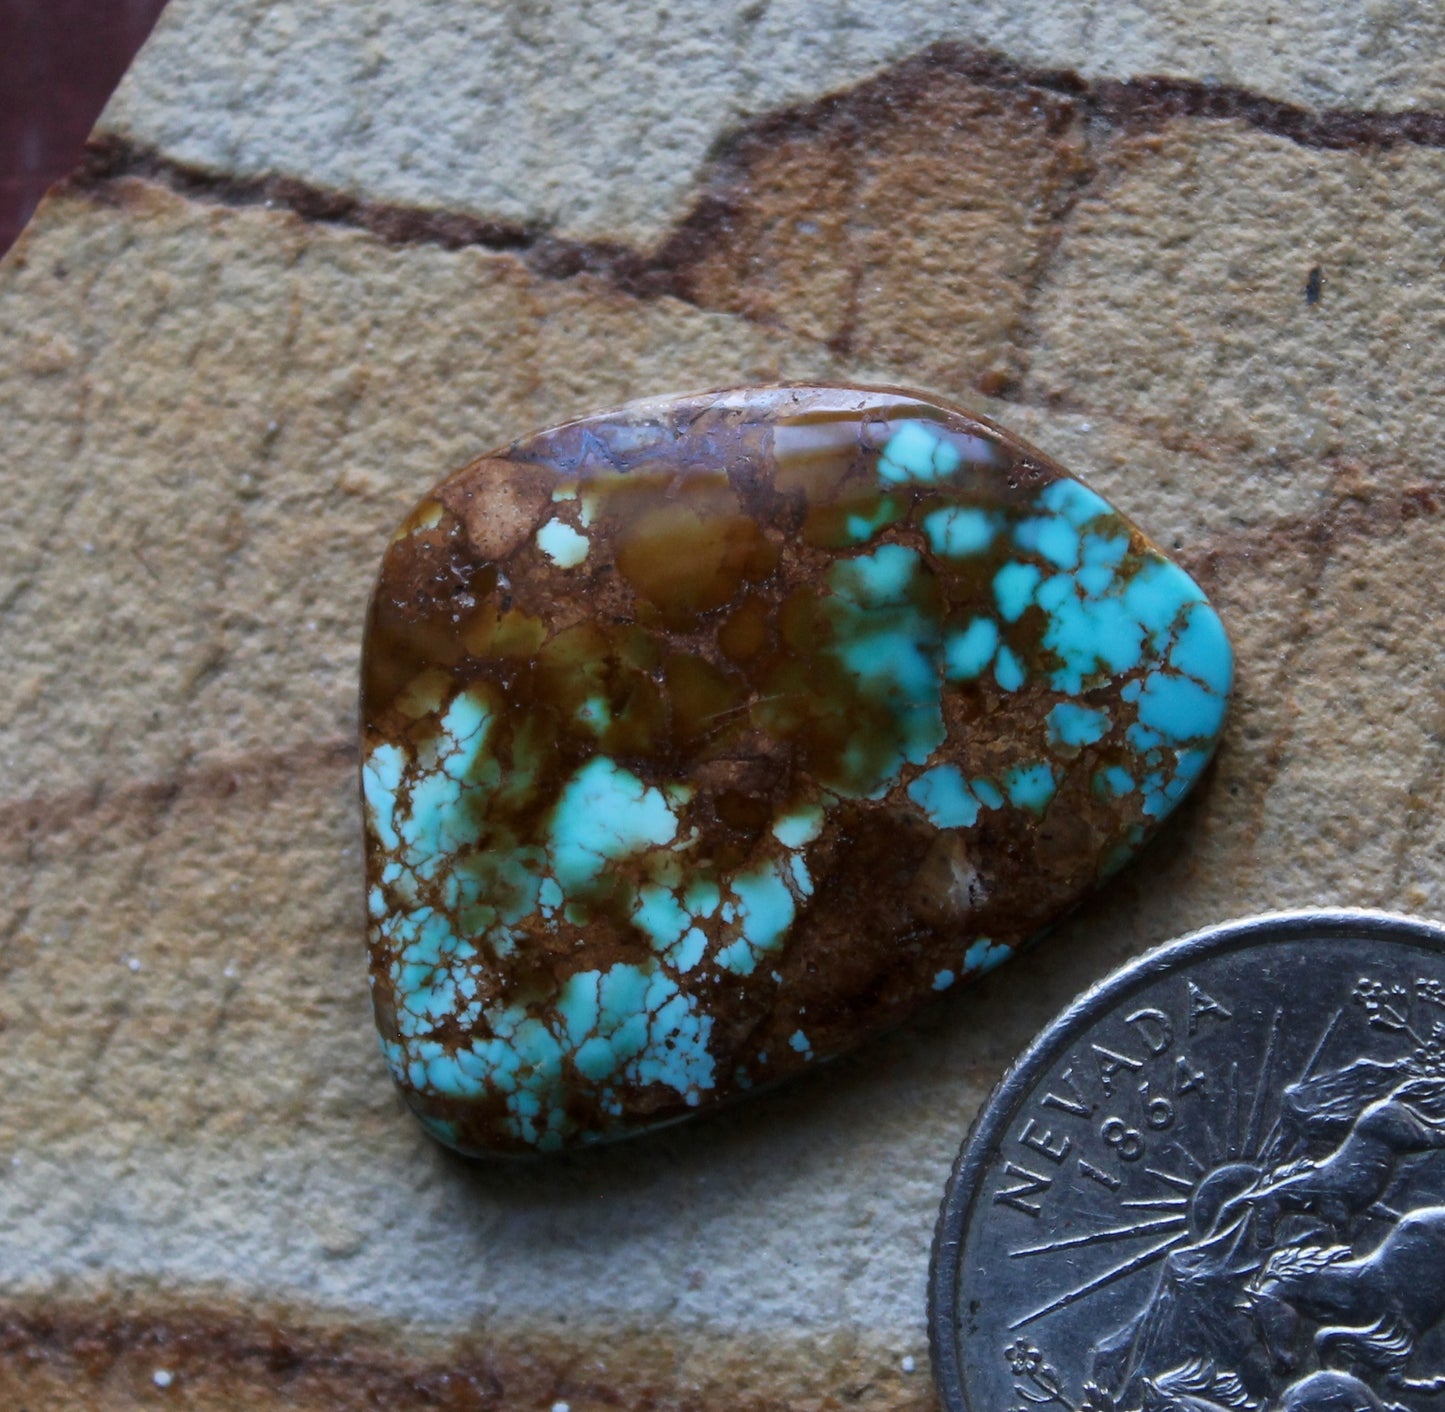 21.2 carat blue Stone Mountain Turquoise cabochon with red matrix